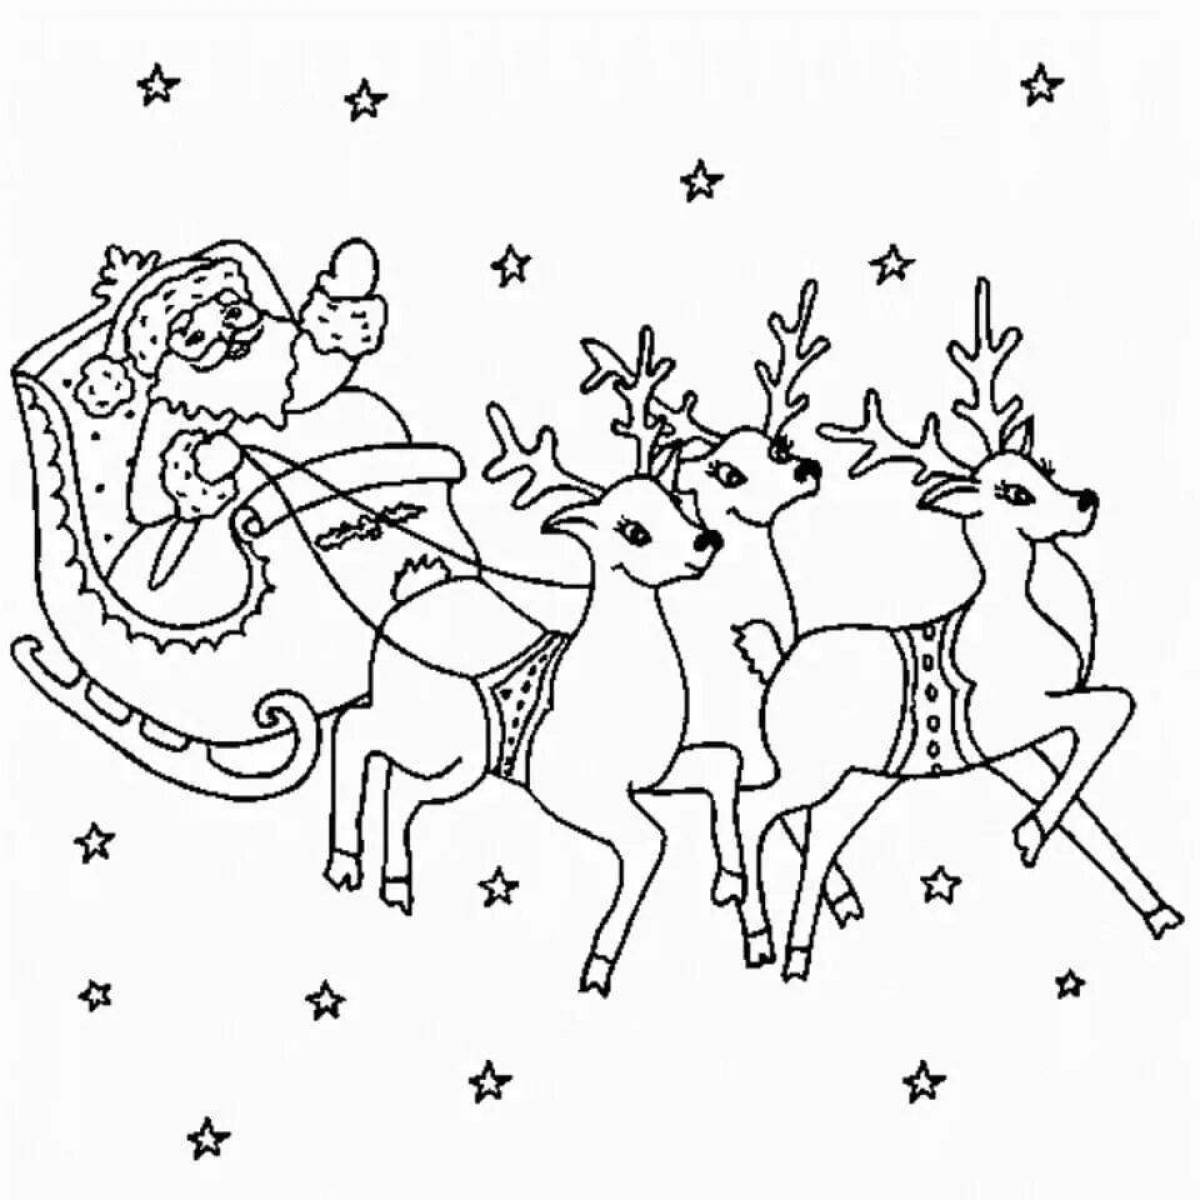 Exquisite santa claus and reindeer coloring book